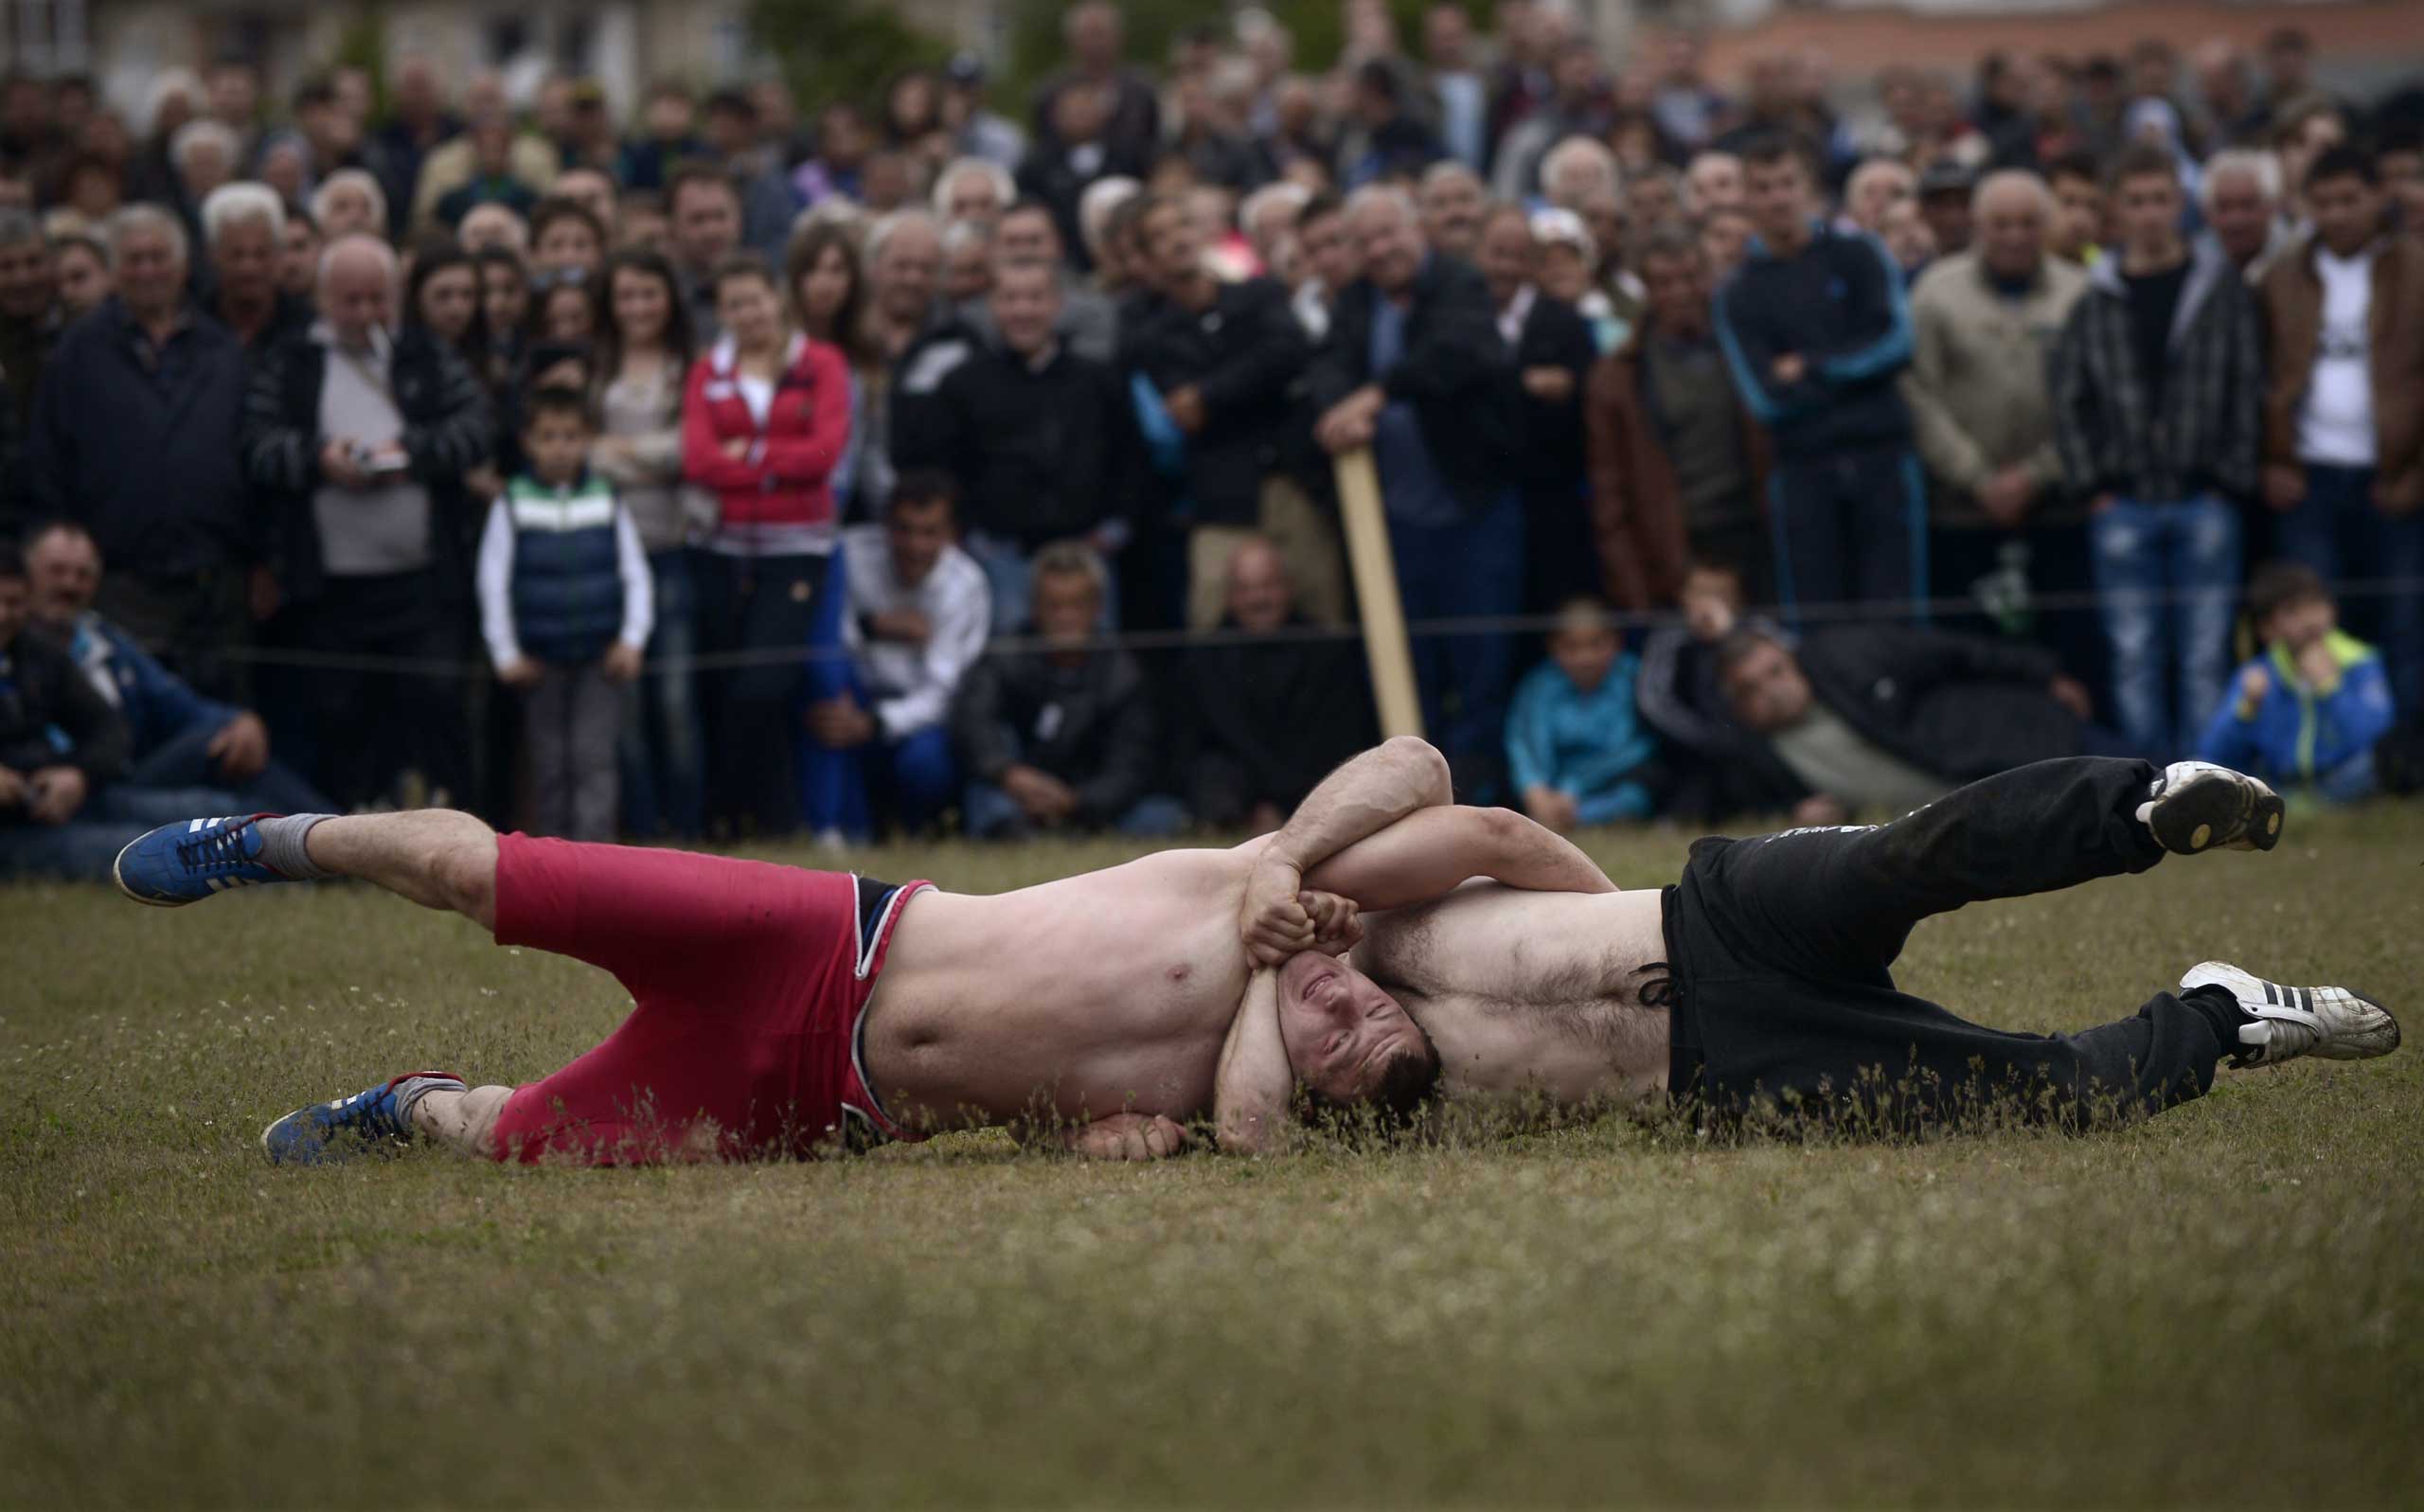 Competitors fight during a traditional wrestling tournament in the village of Draginovo, south-east of Sofia. Bulgaria, May 4, 2014.